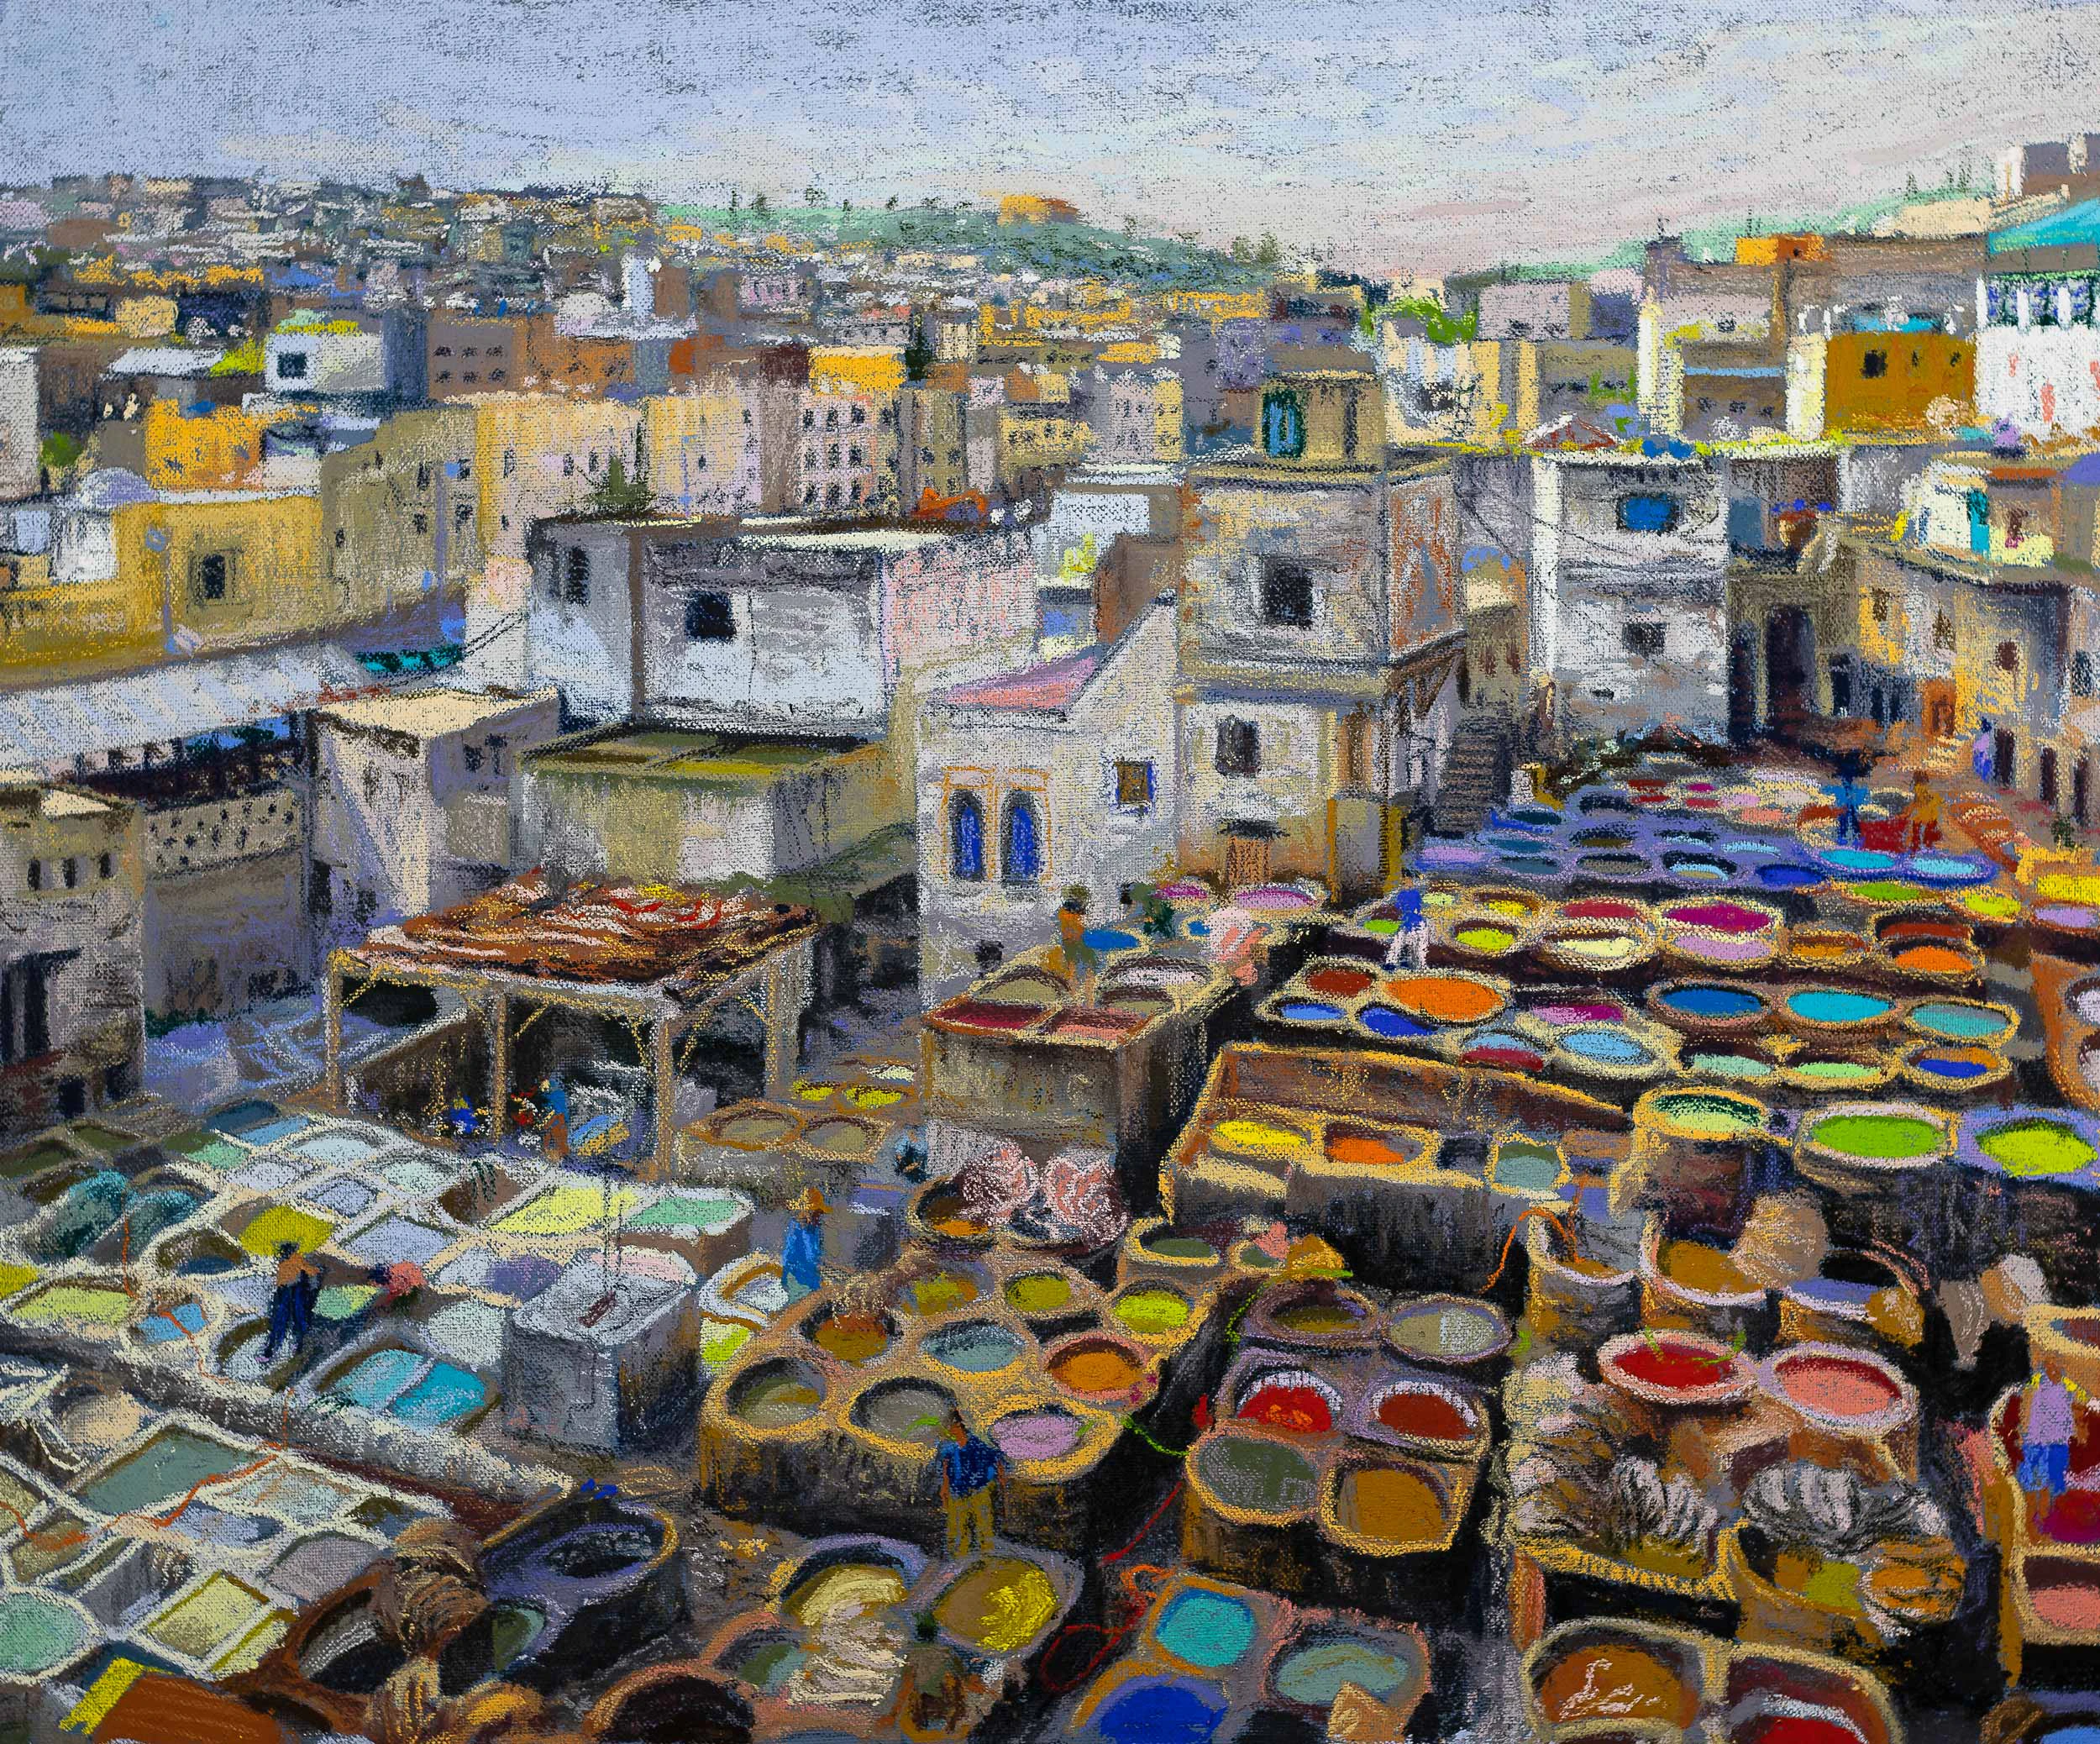 'The Tanneries'